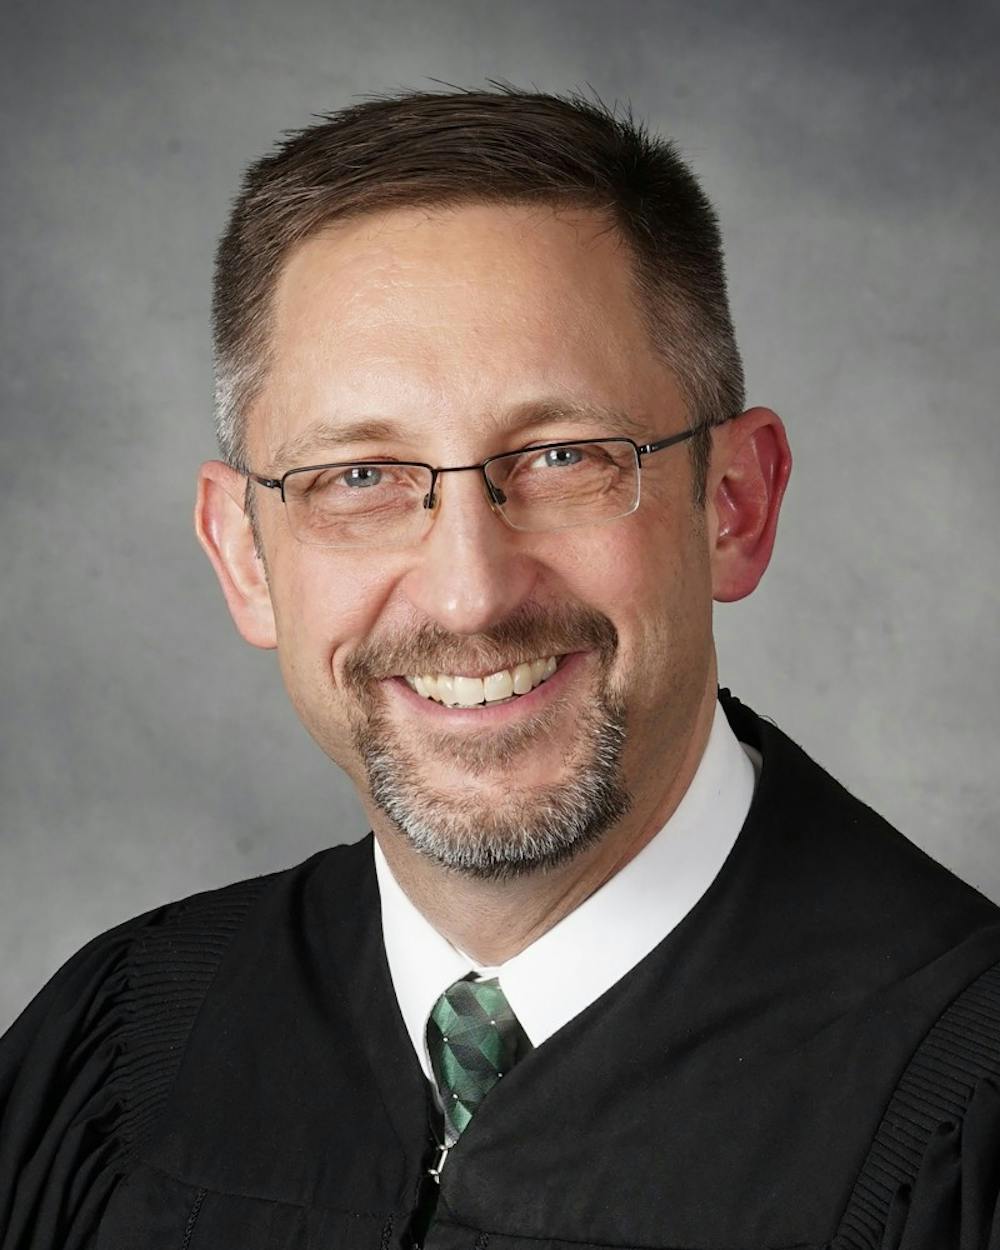 Governor Holcomb selects Ball State alumnus Christopher Goff to Indiana Supreme Court